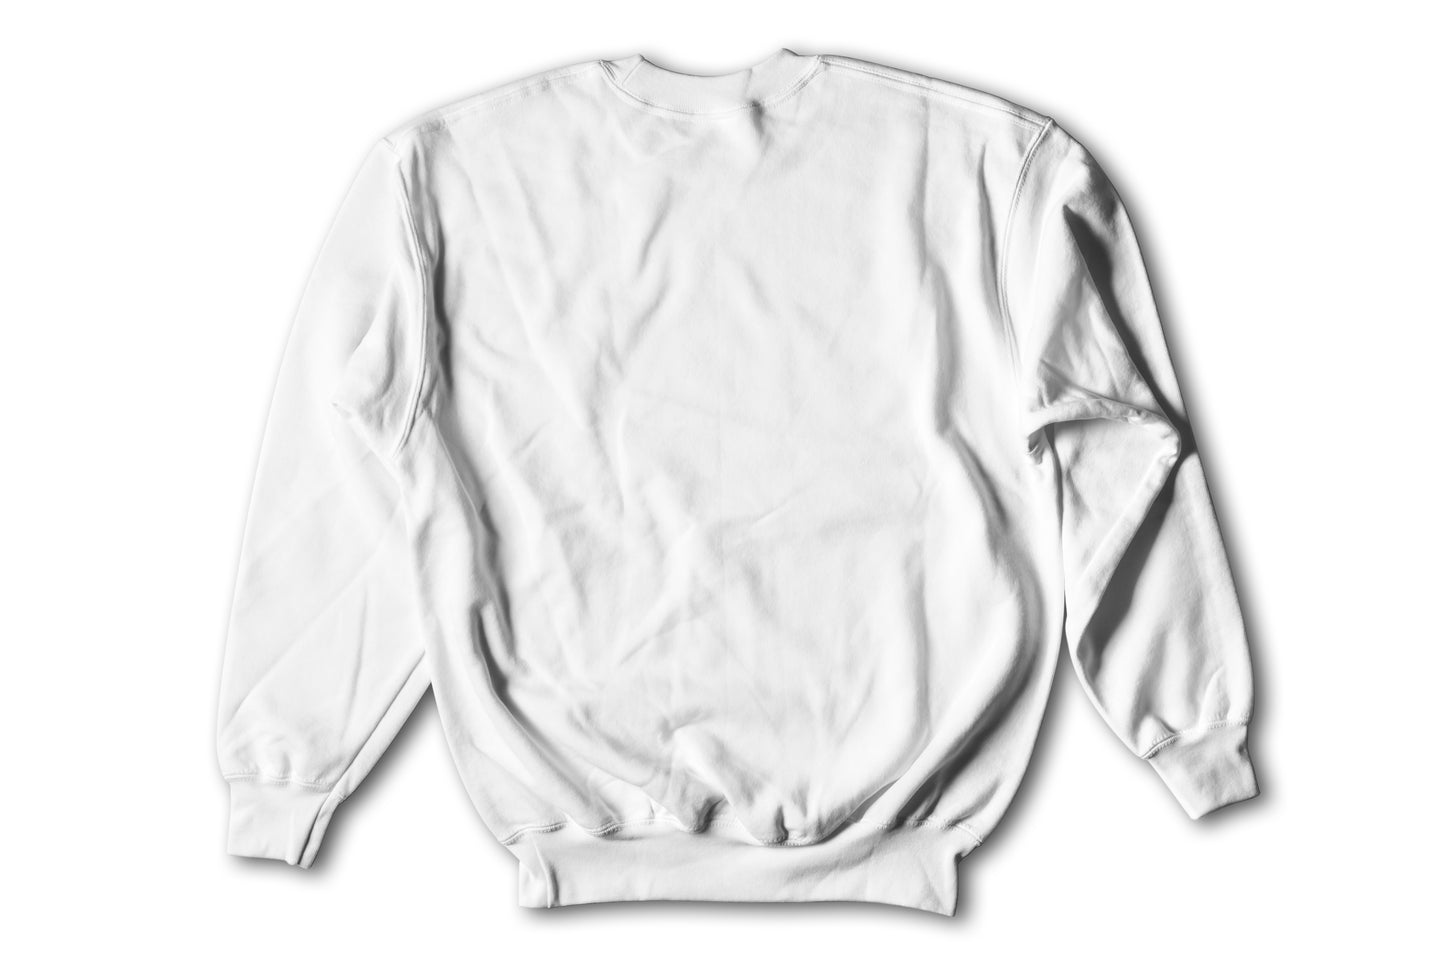 The Yellow Subway Line Patch on White Crewneck